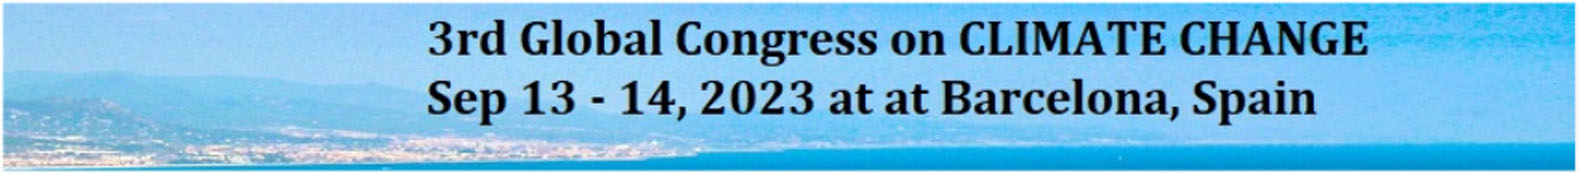 3rd Global Congress on Climate Change